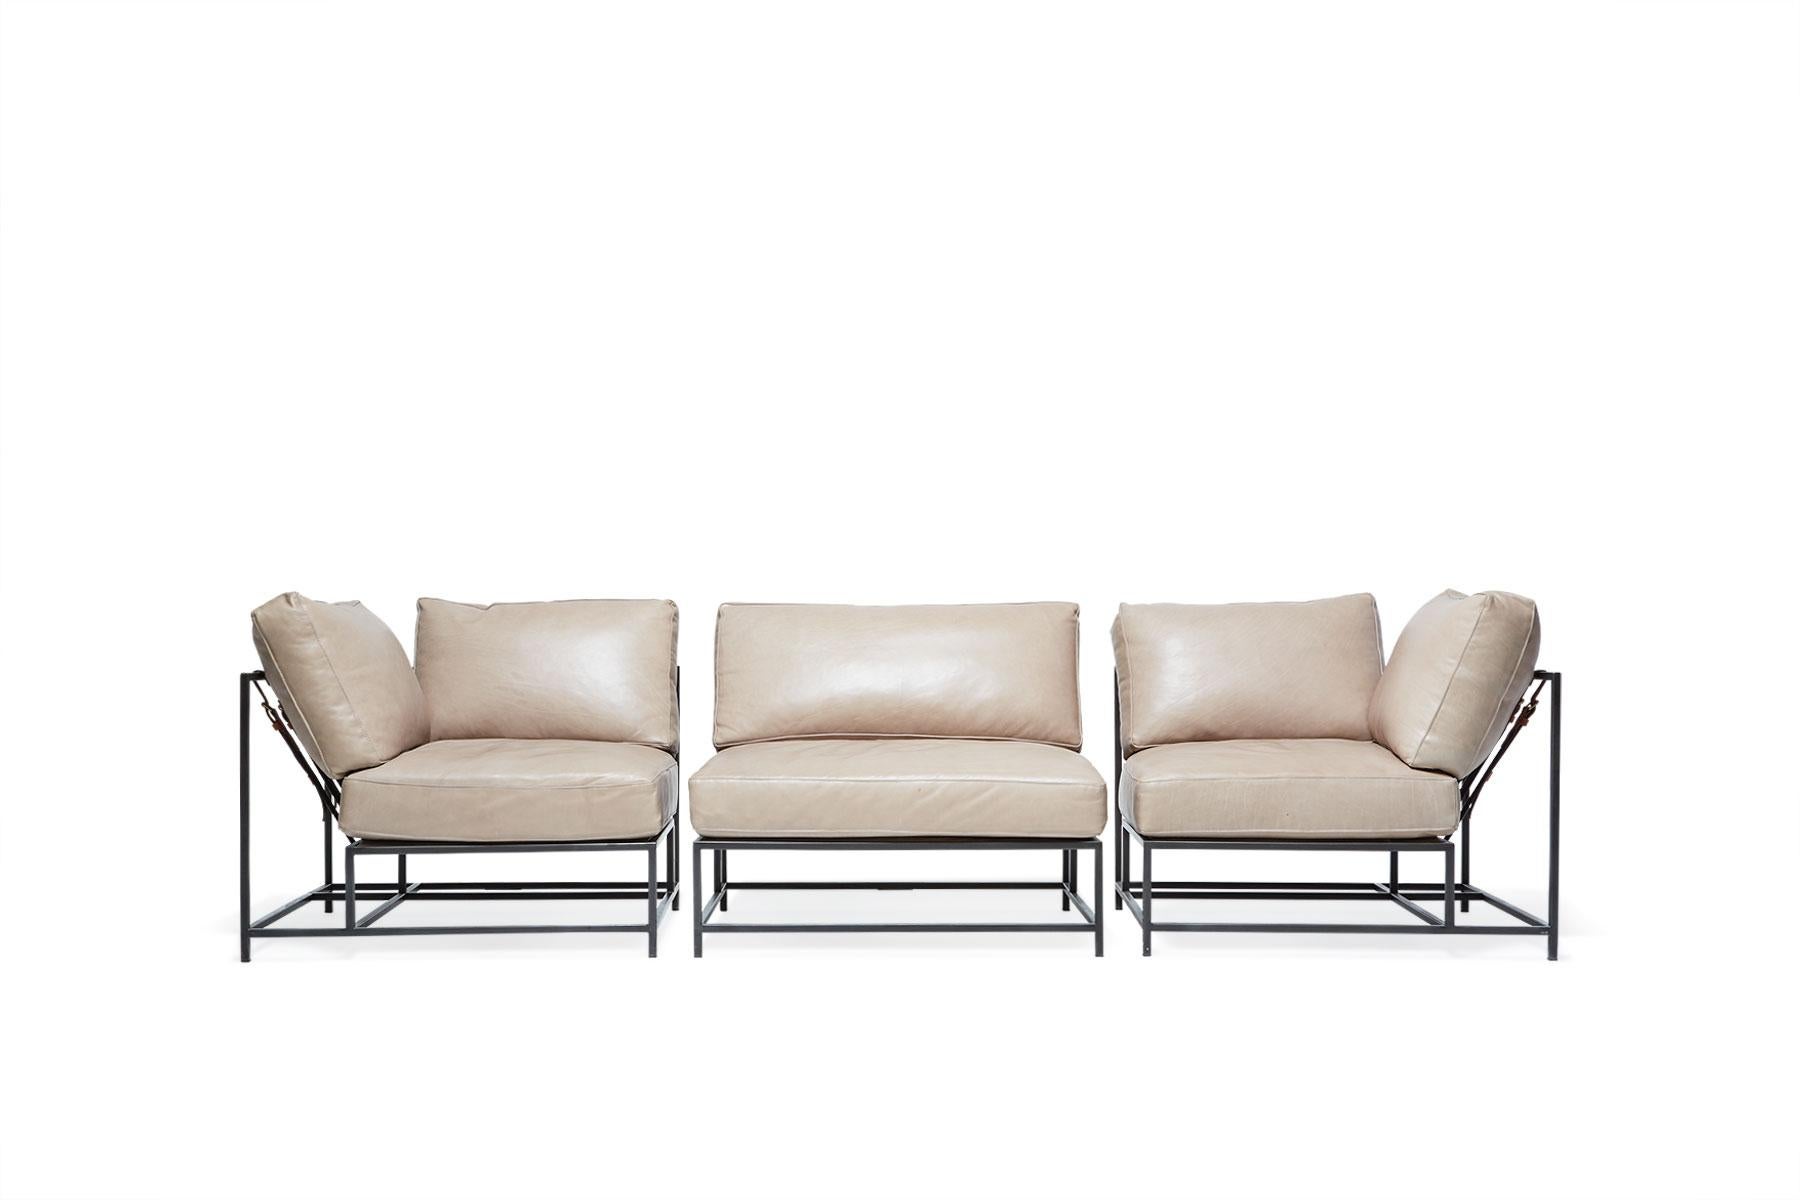 The Inheritance Sectional by Stephen Kenn is as comfortable as it is unique. The design features an exposed construction composed of three elements - a steel frame, plush upholstery, and supportive belts. The deep seating area is perfect for a